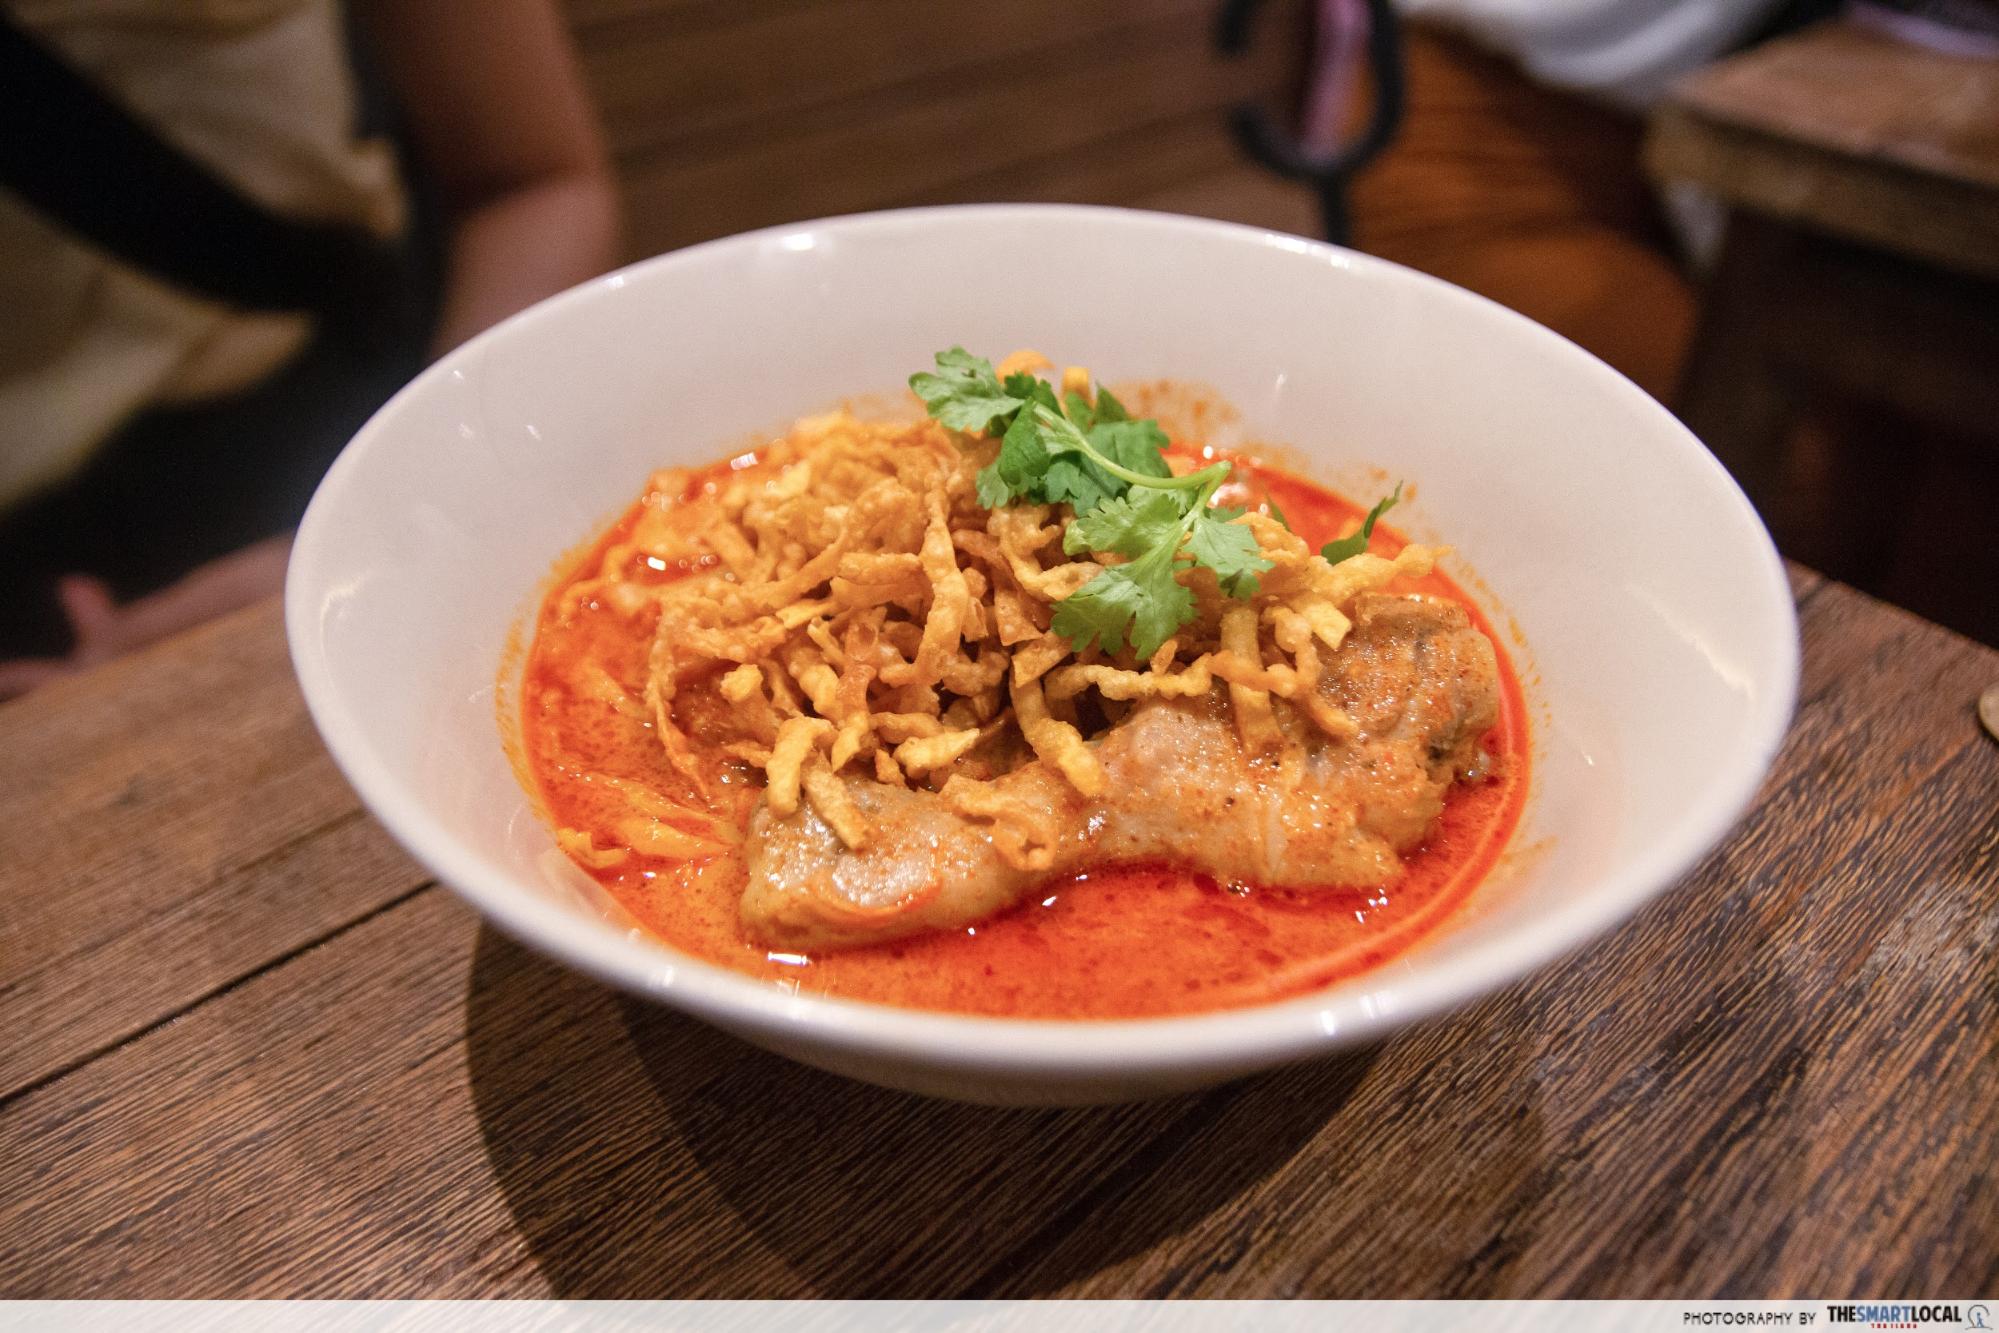 Khaosoi with chicken